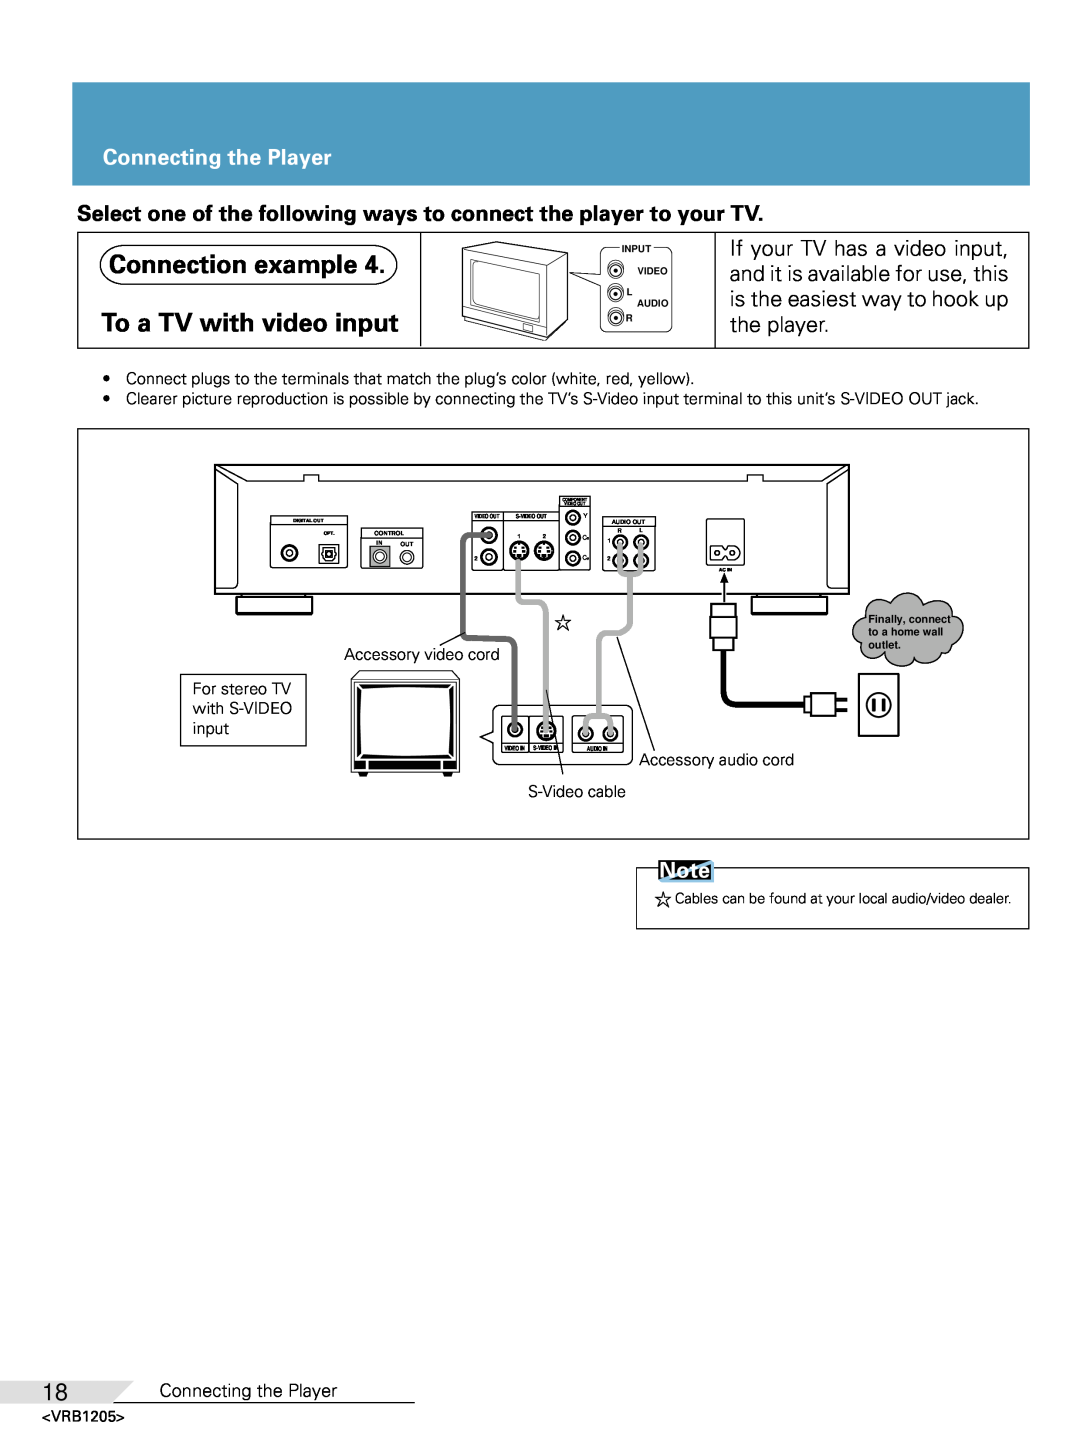 Pioneer DV-05 operating instructions Connection example To a TV with video input, Connecting the Player 